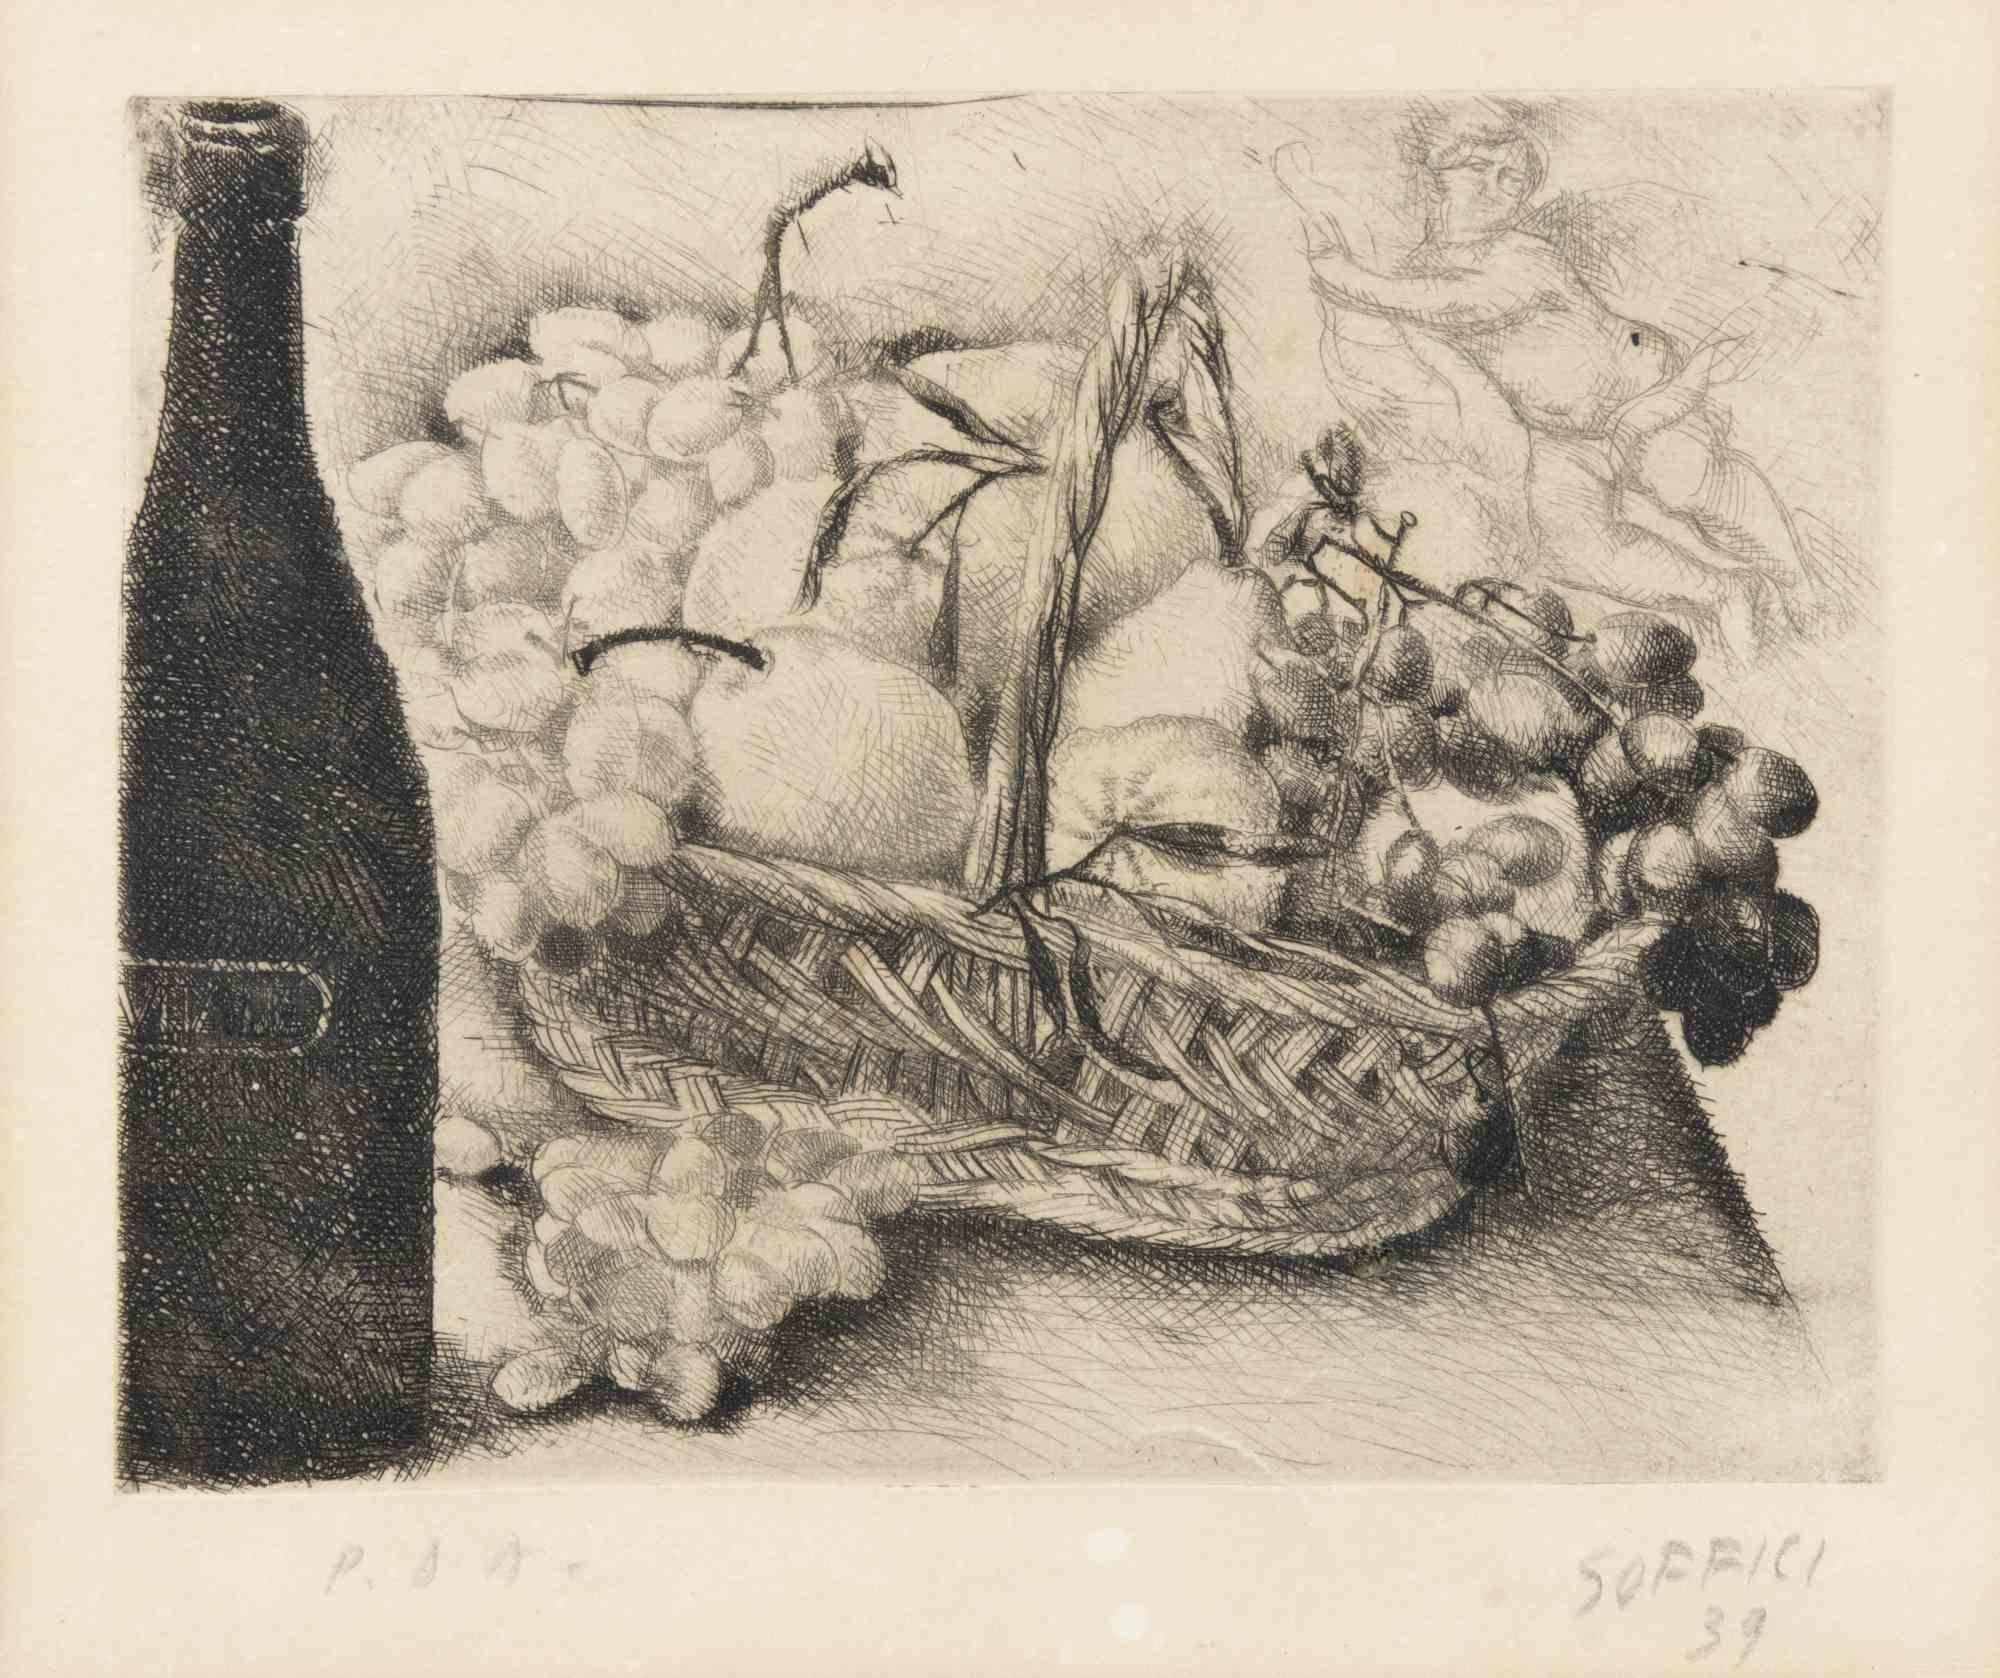 Ardengo Soffici Still-Life Print - Untitled -  Drypoint by A. Soffici - 1939